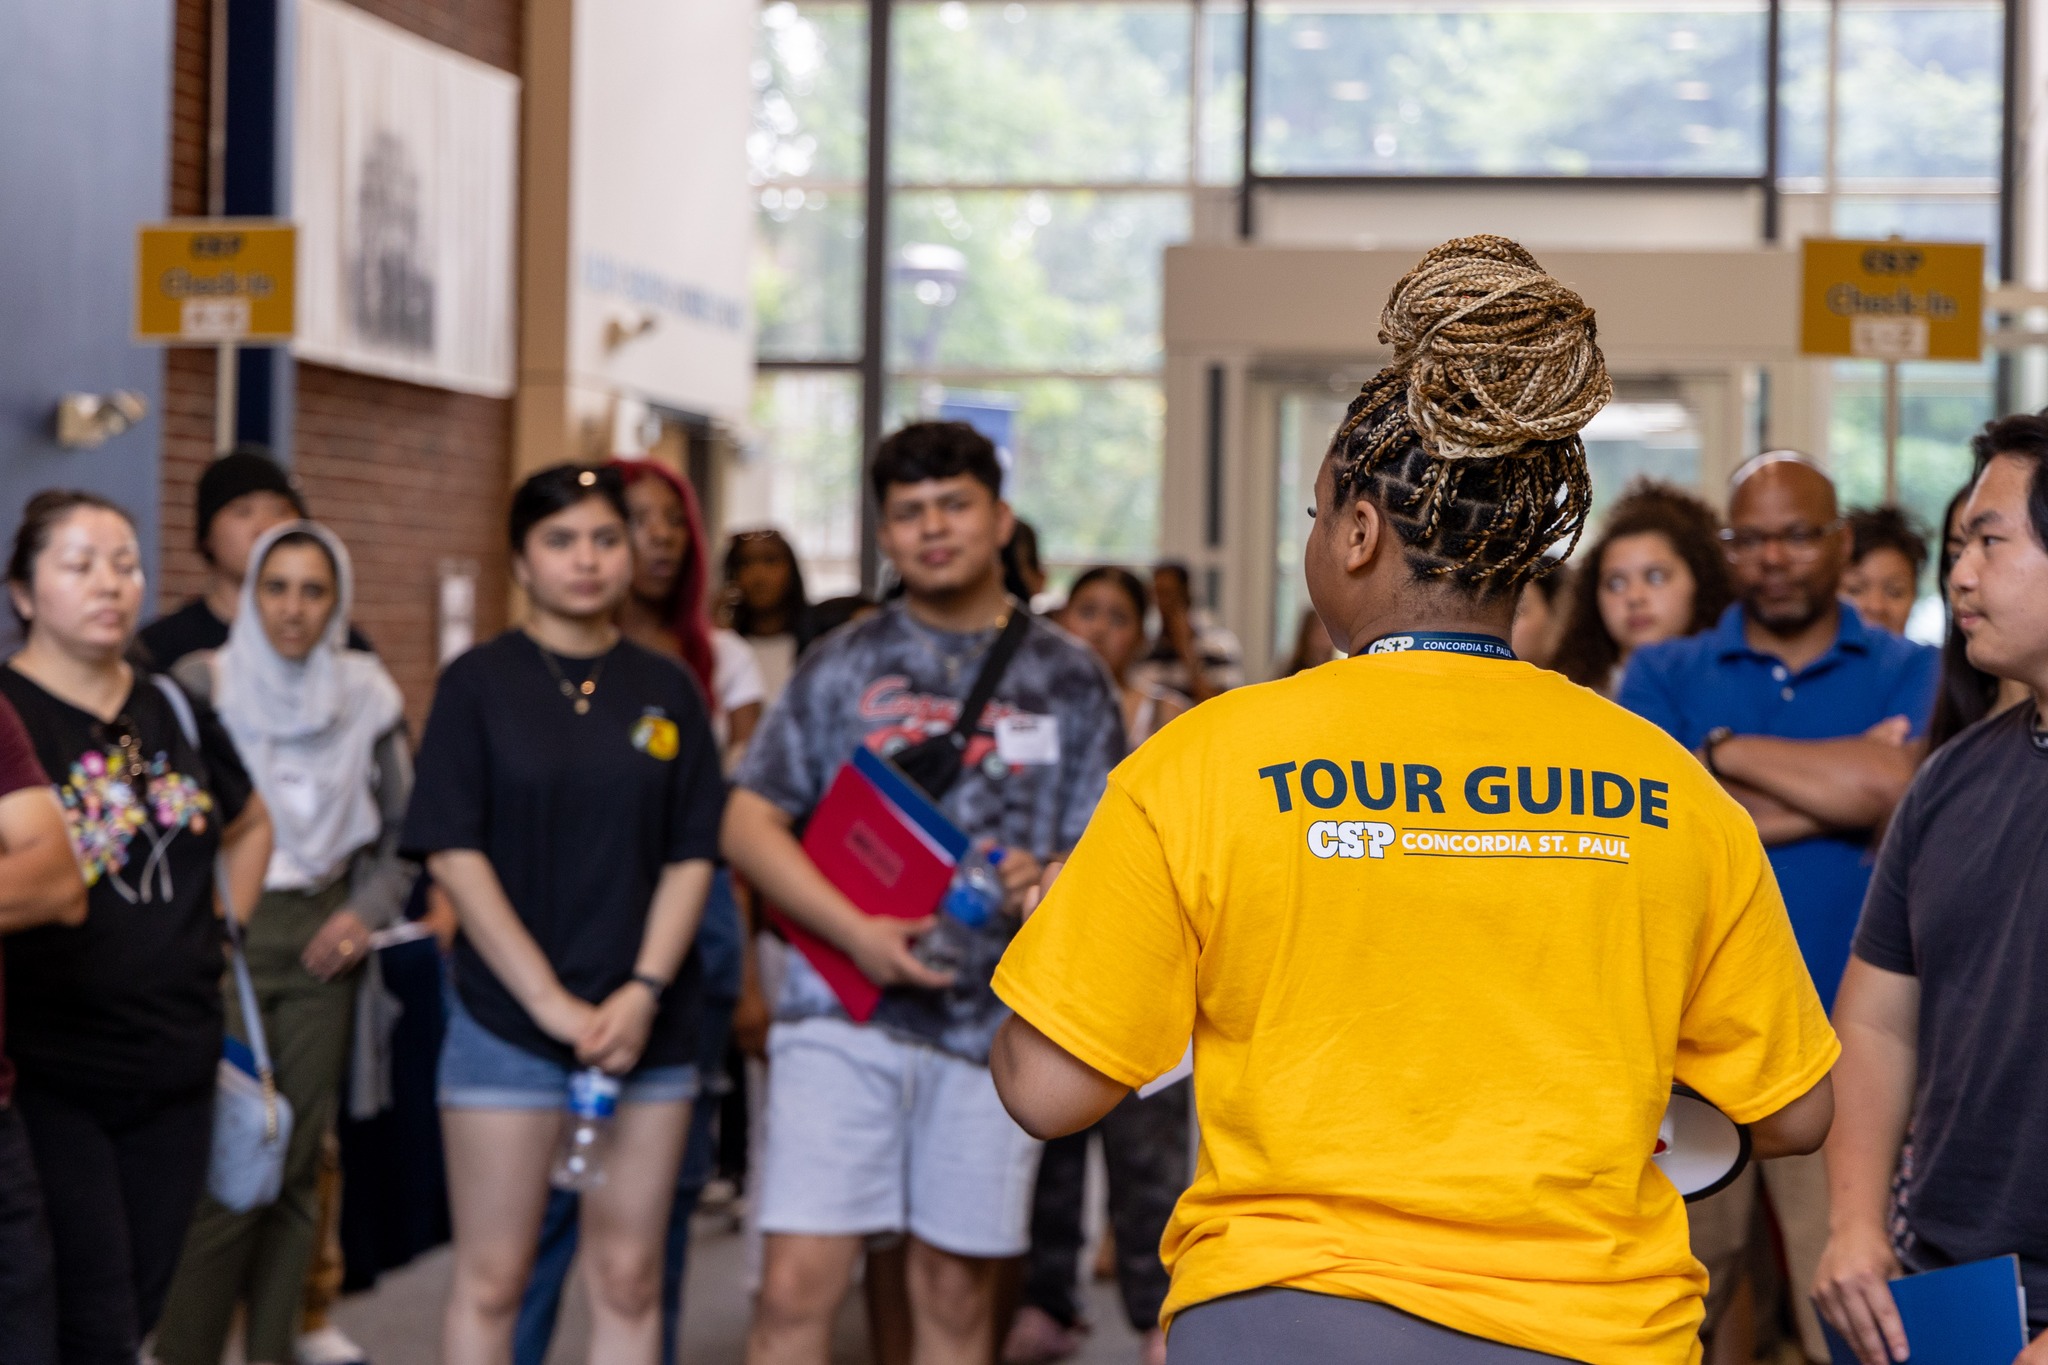 A tour guide speaking with a group of visitors.